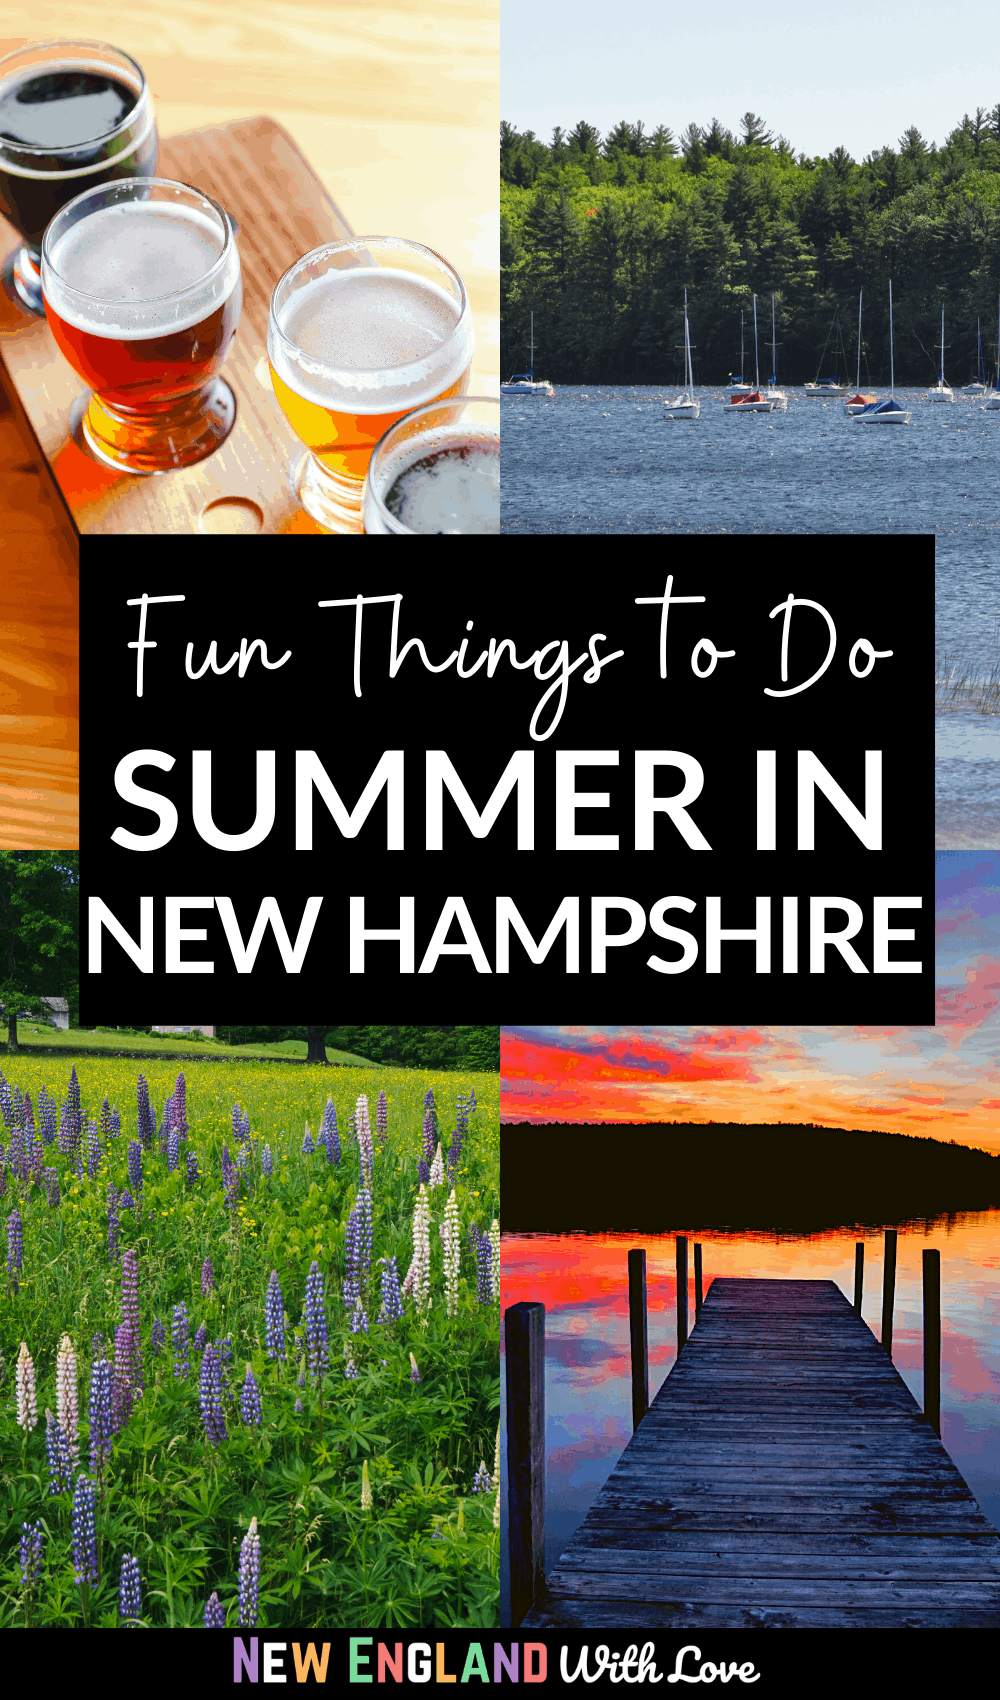 Pinterest graphic reading "Fun Things To Do SUMMER IN NEW HAMPSHIRE"